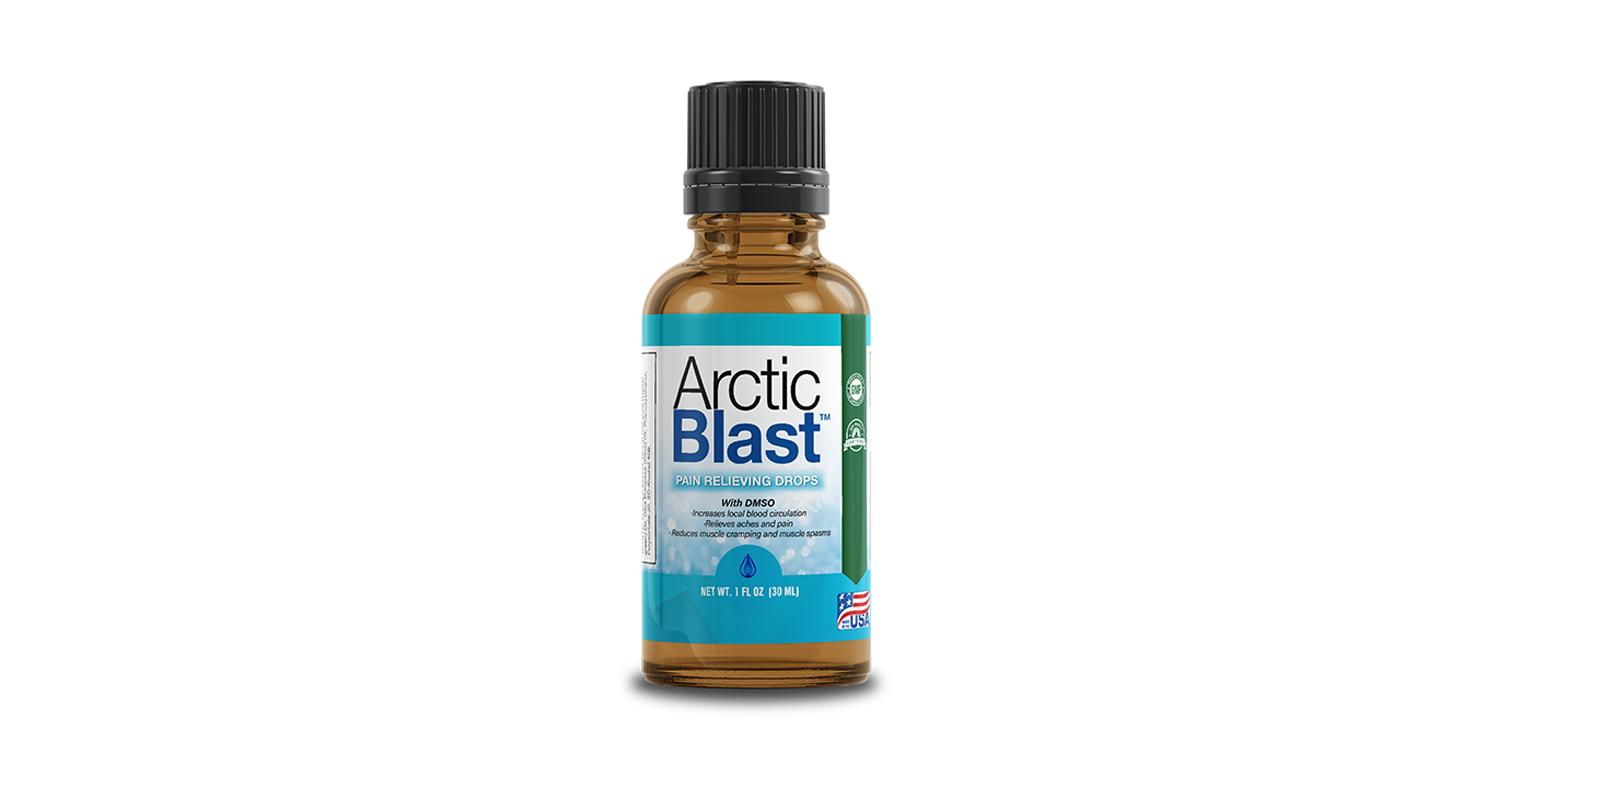 Are these natural pain relief drops called Arctic Blast?